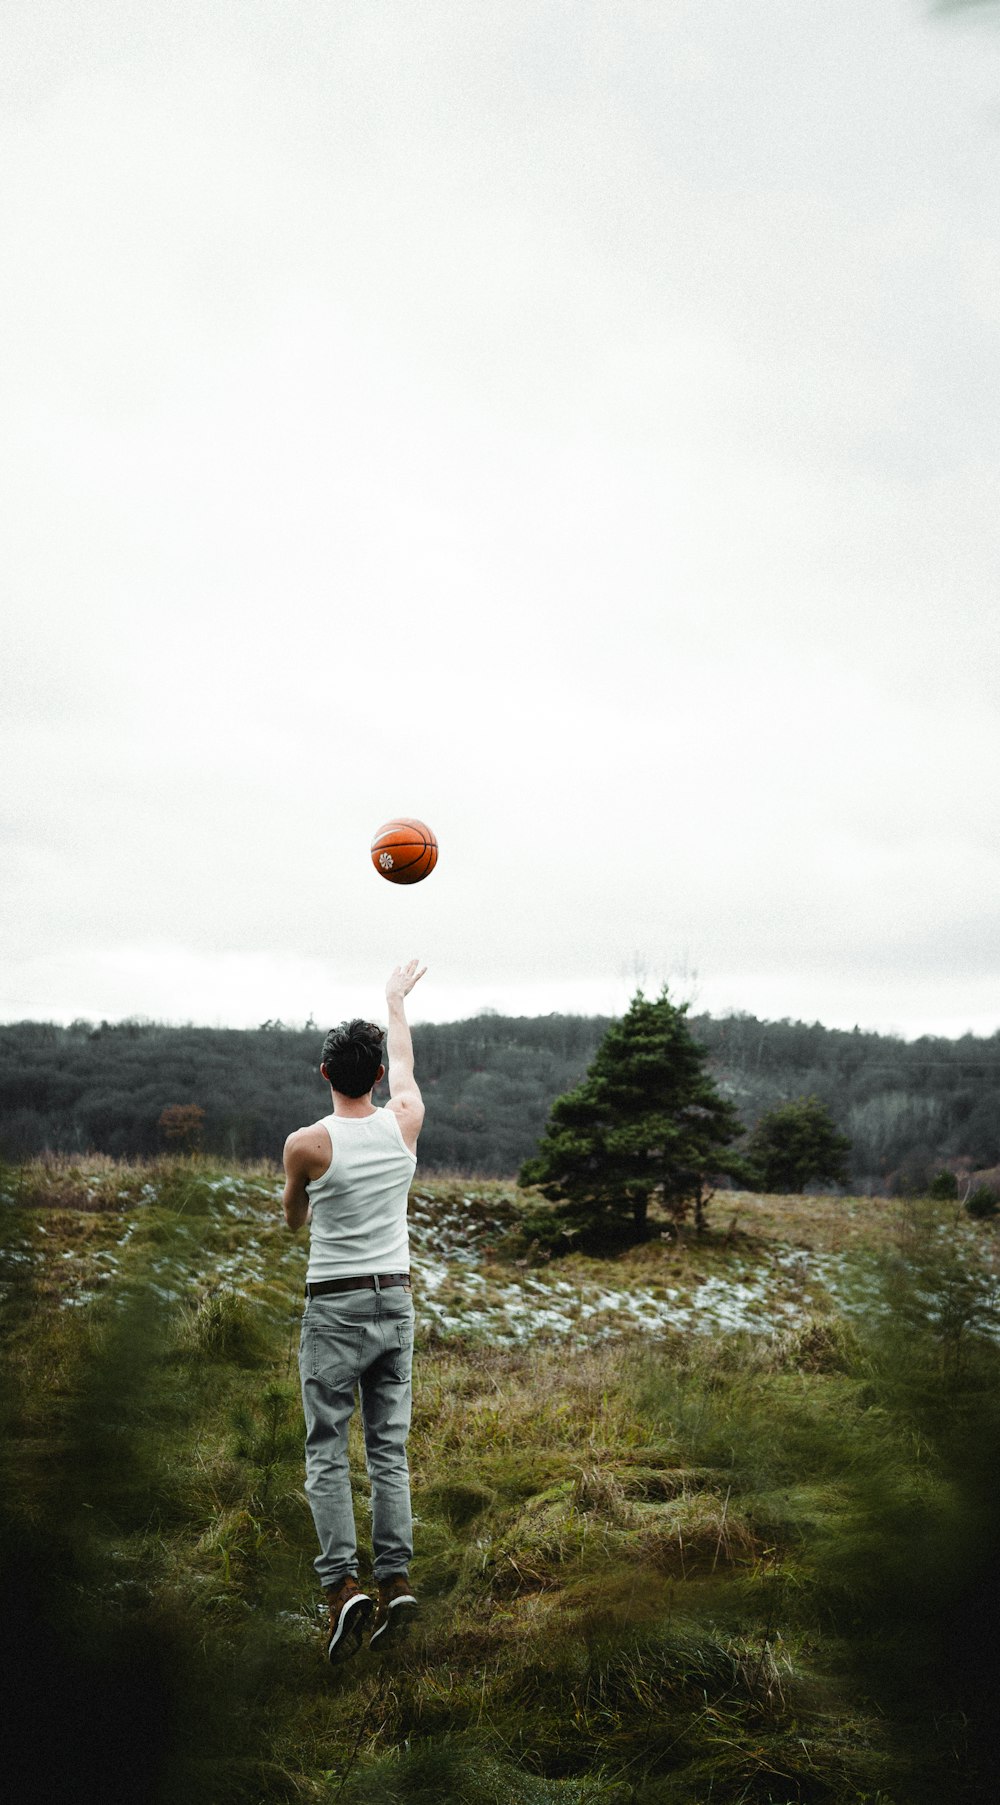 a man is playing with a basketball in a field